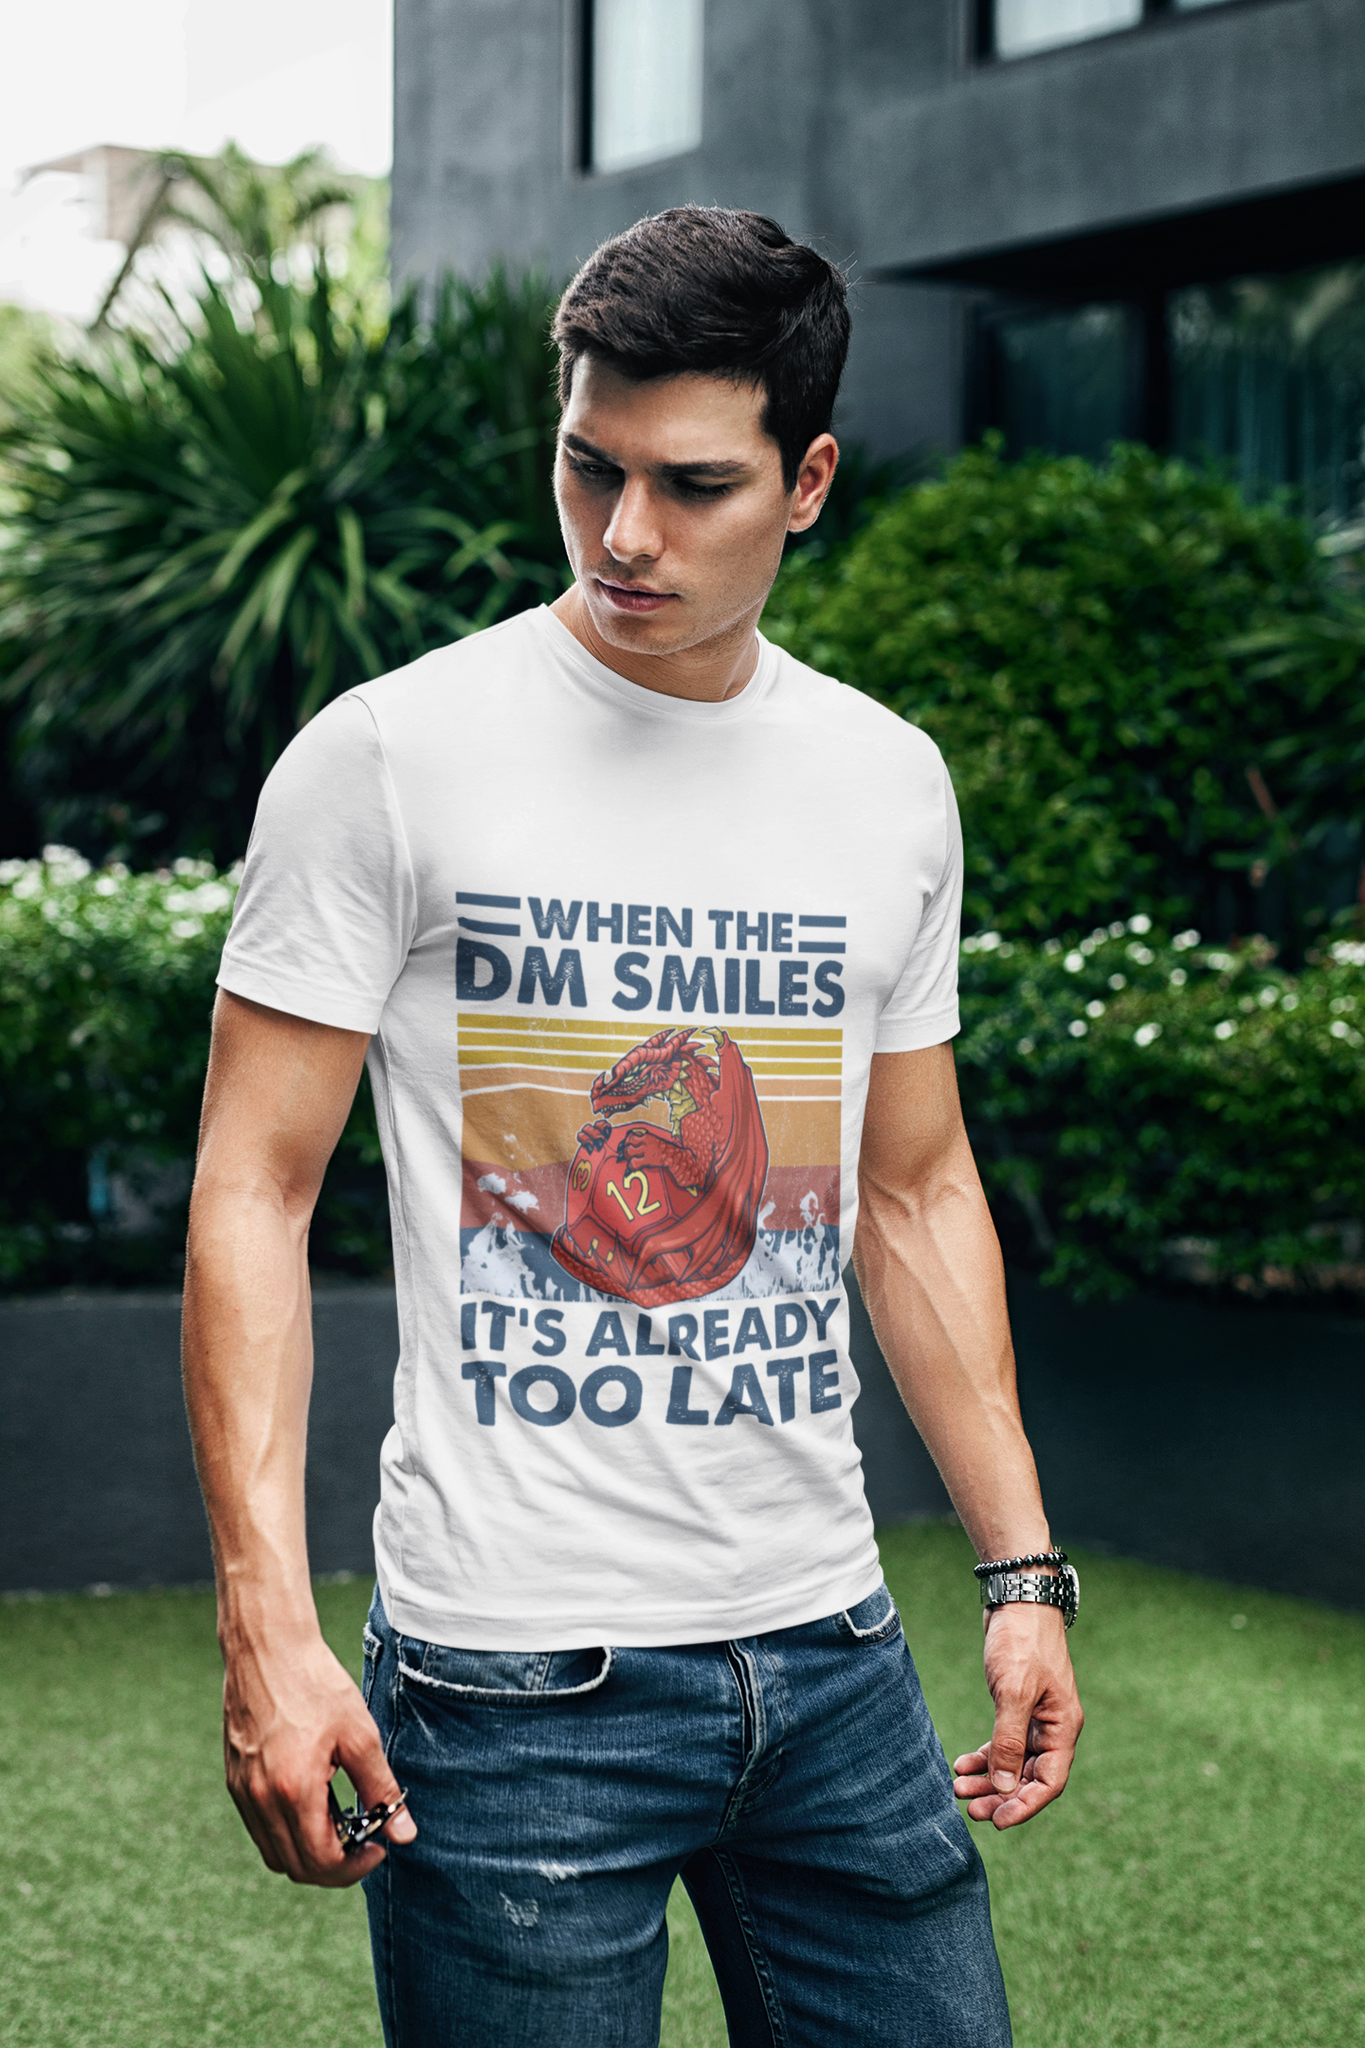 Dungeon And Dragon Vintage T Shirt, RPG Dice Games Tshirt, Red Dragon When The Dm Smiles Its Already Too Late T Shirt